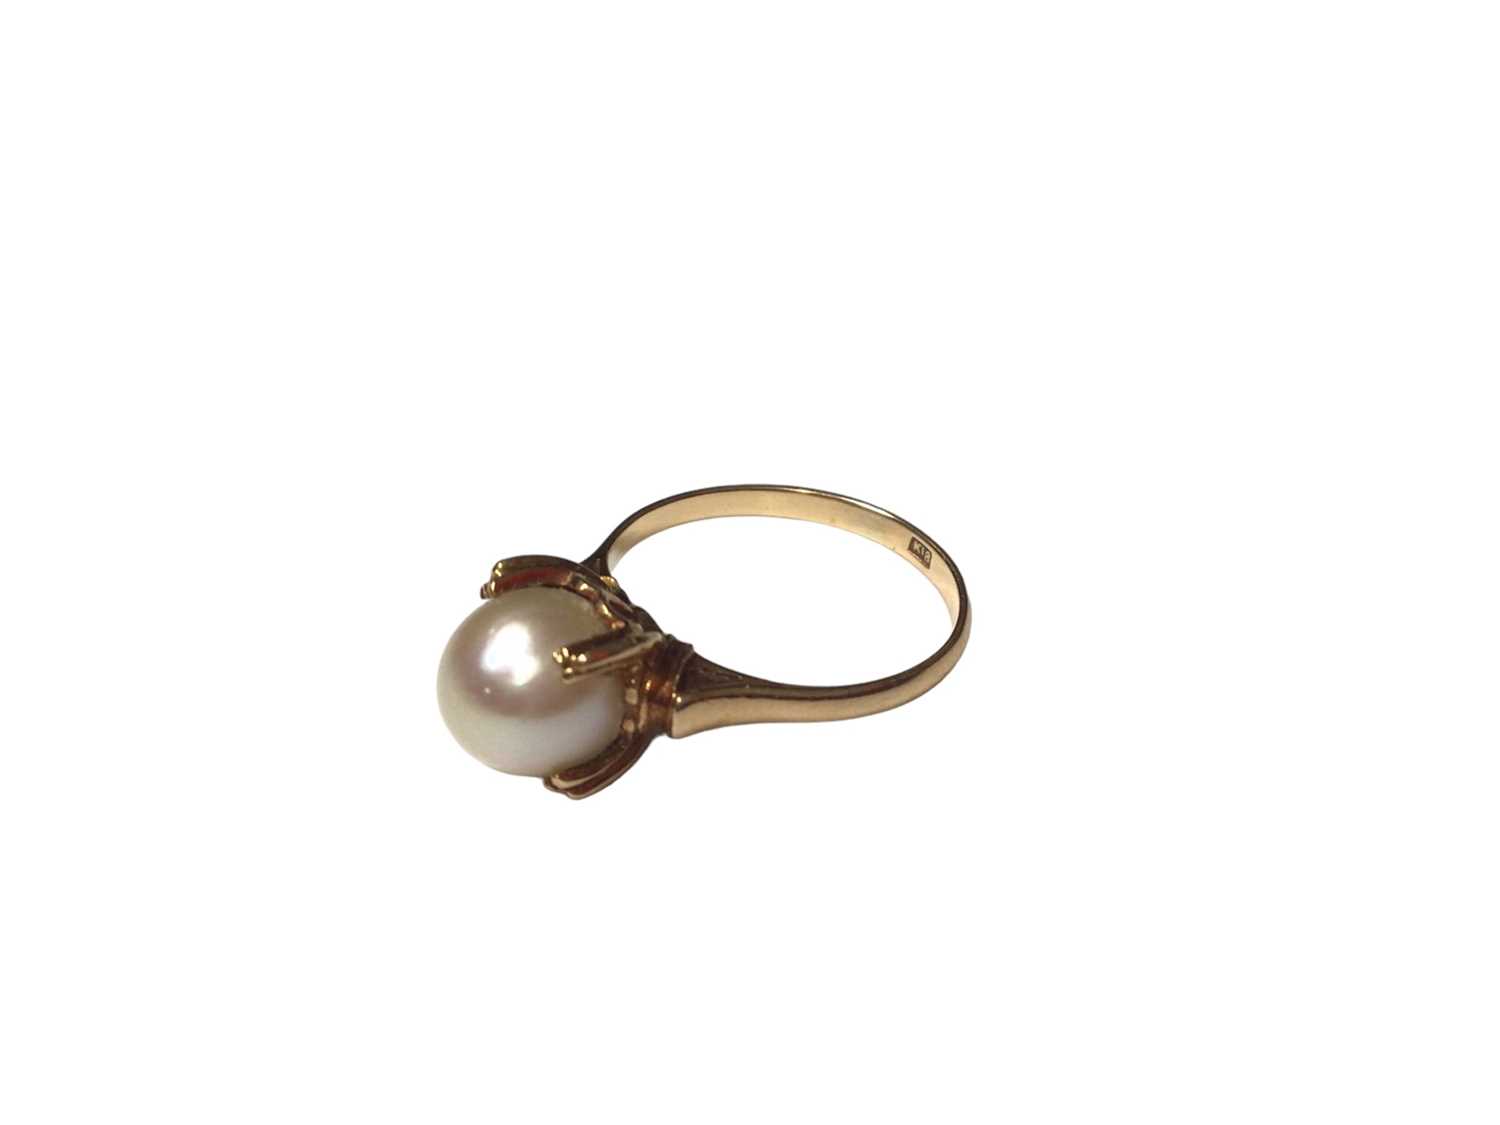 18ct gold single stone cultured pearl ring in four claw setting, size L - Image 2 of 4